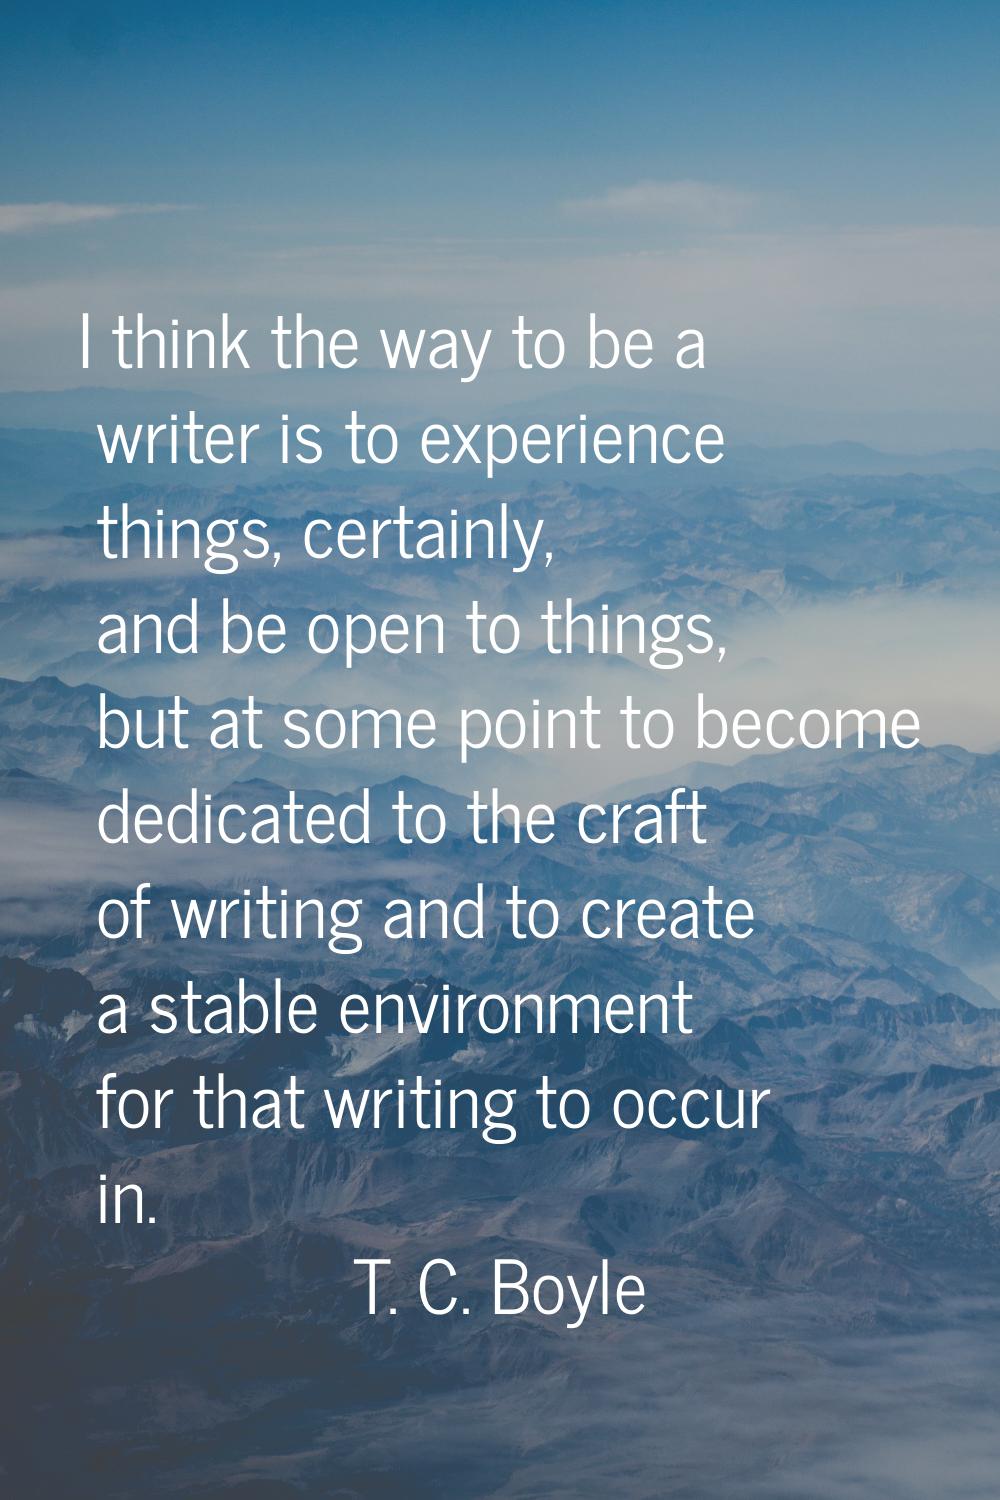 I think the way to be a writer is to experience things, certainly, and be open to things, but at so